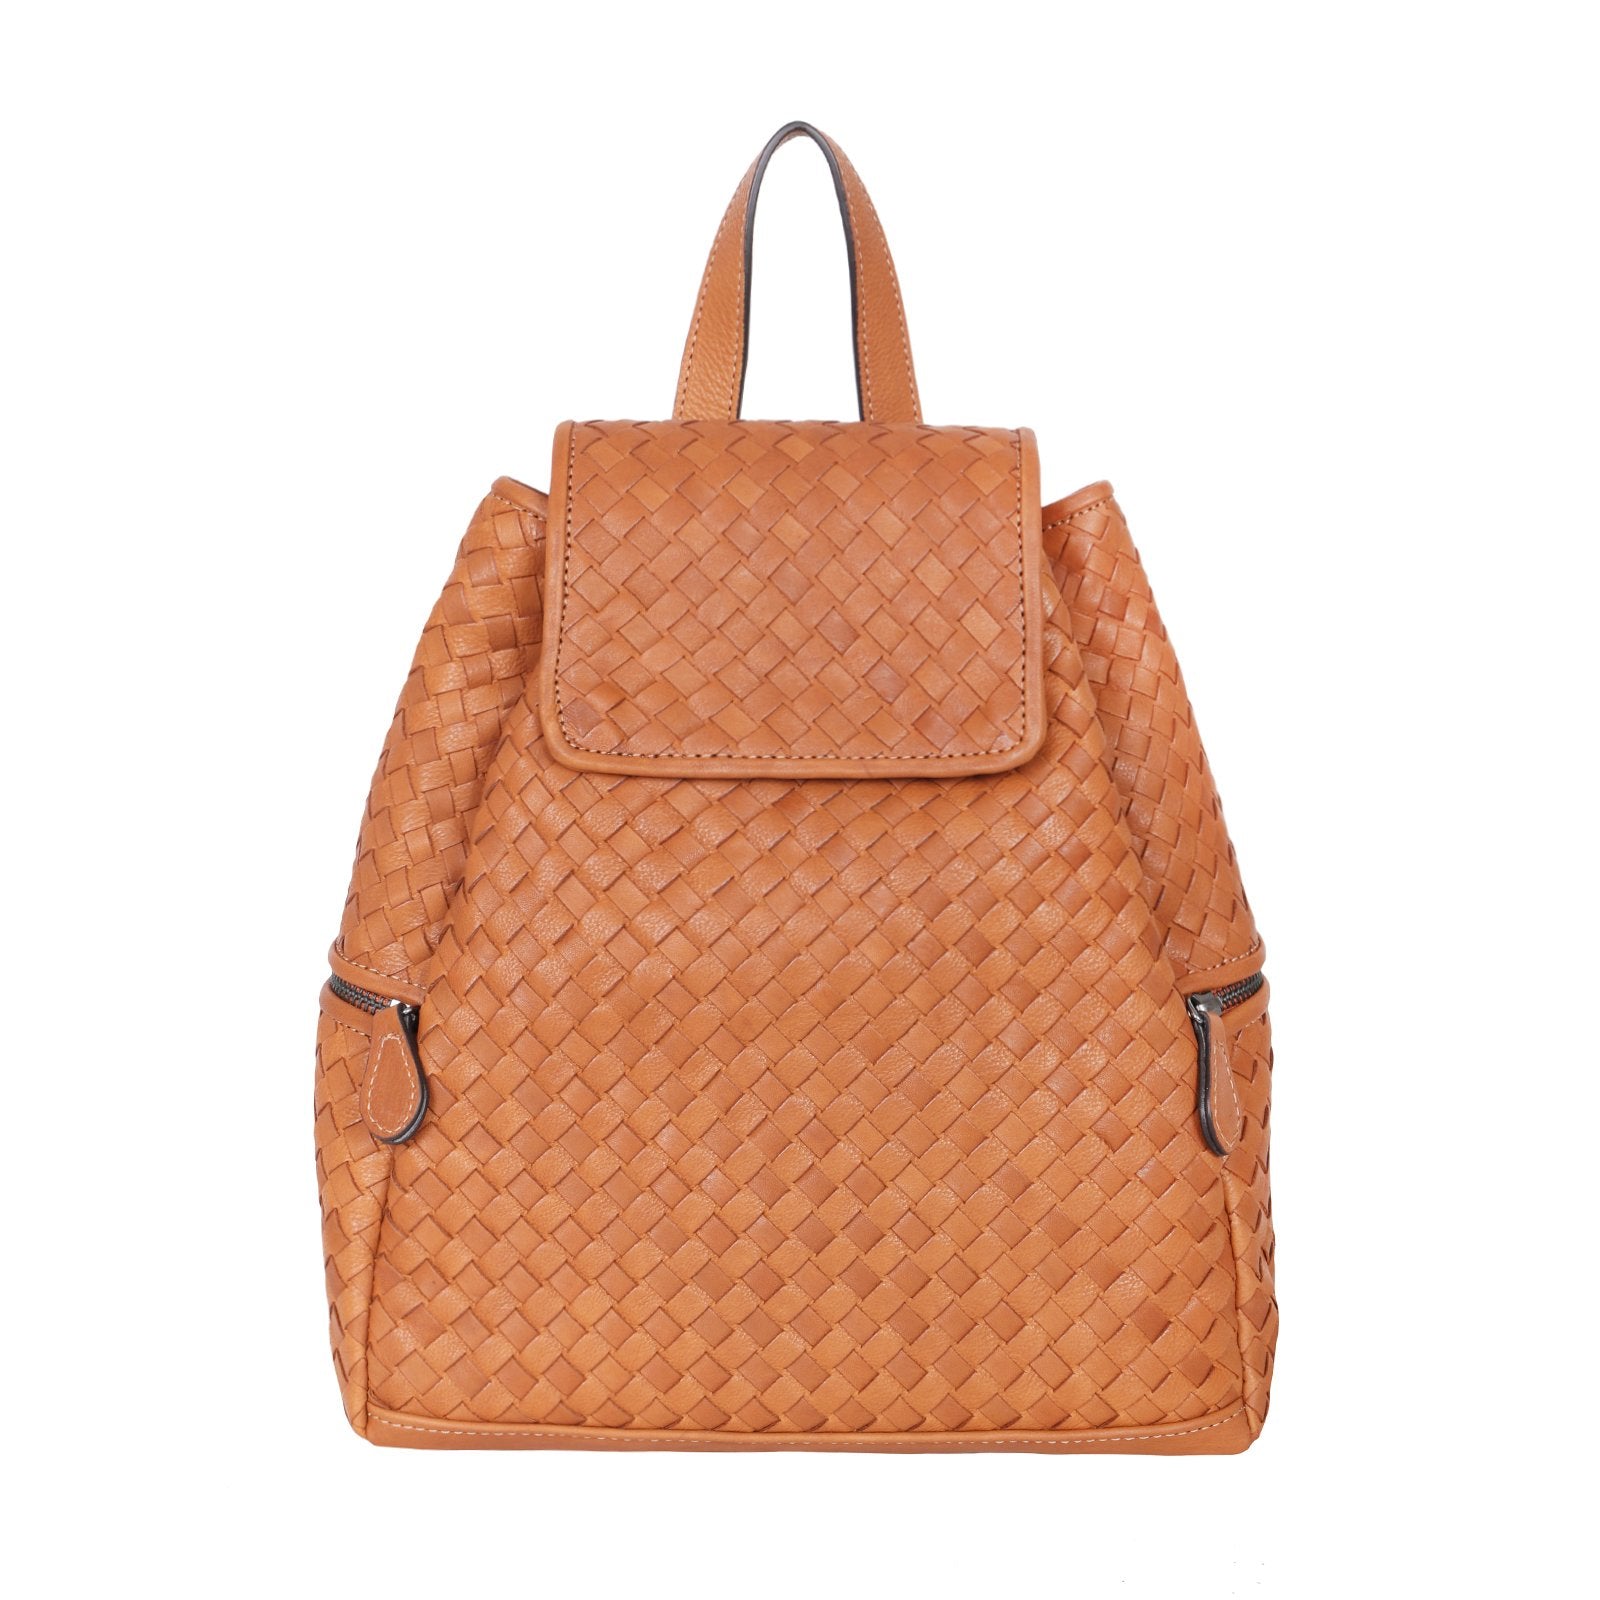 The Woven Backpack, Handmade Woven Leather Backpack - MILANER